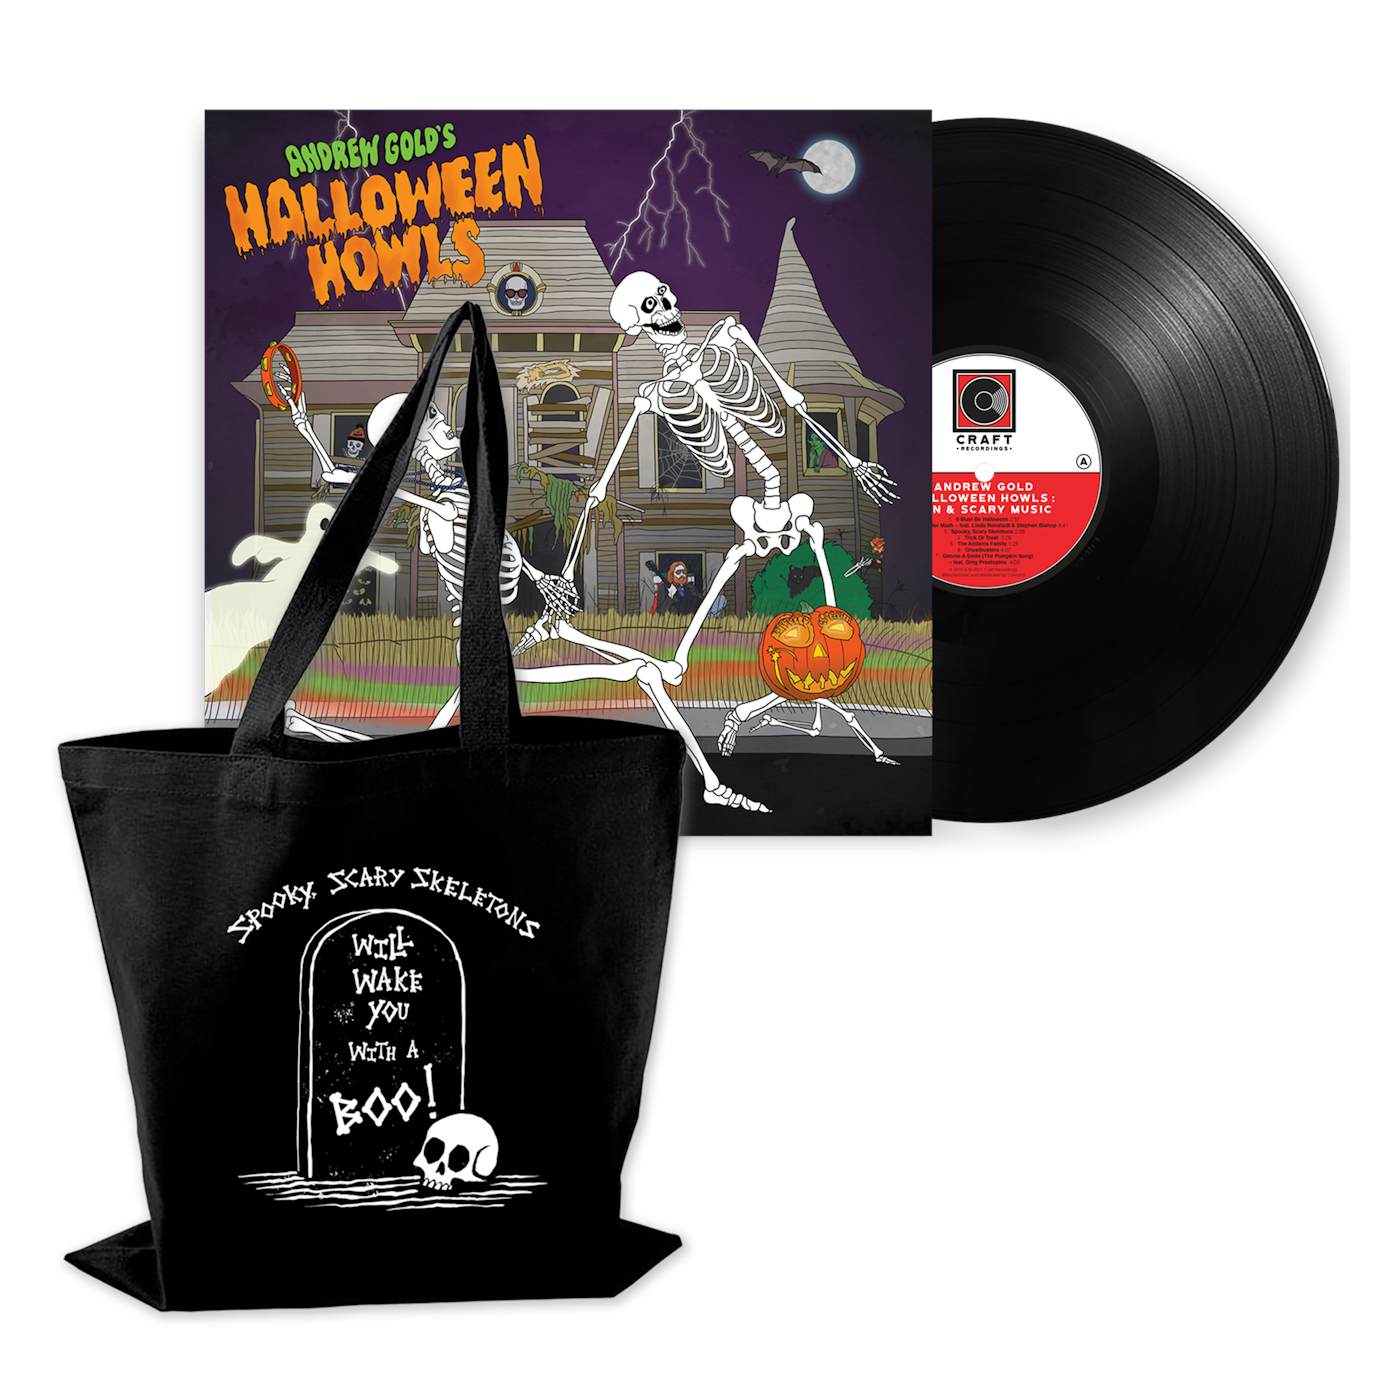 Andrew Gold Halloween Howls: Fun & Scary Music (LP + Trick Or Treat Tote Bag Bundle)